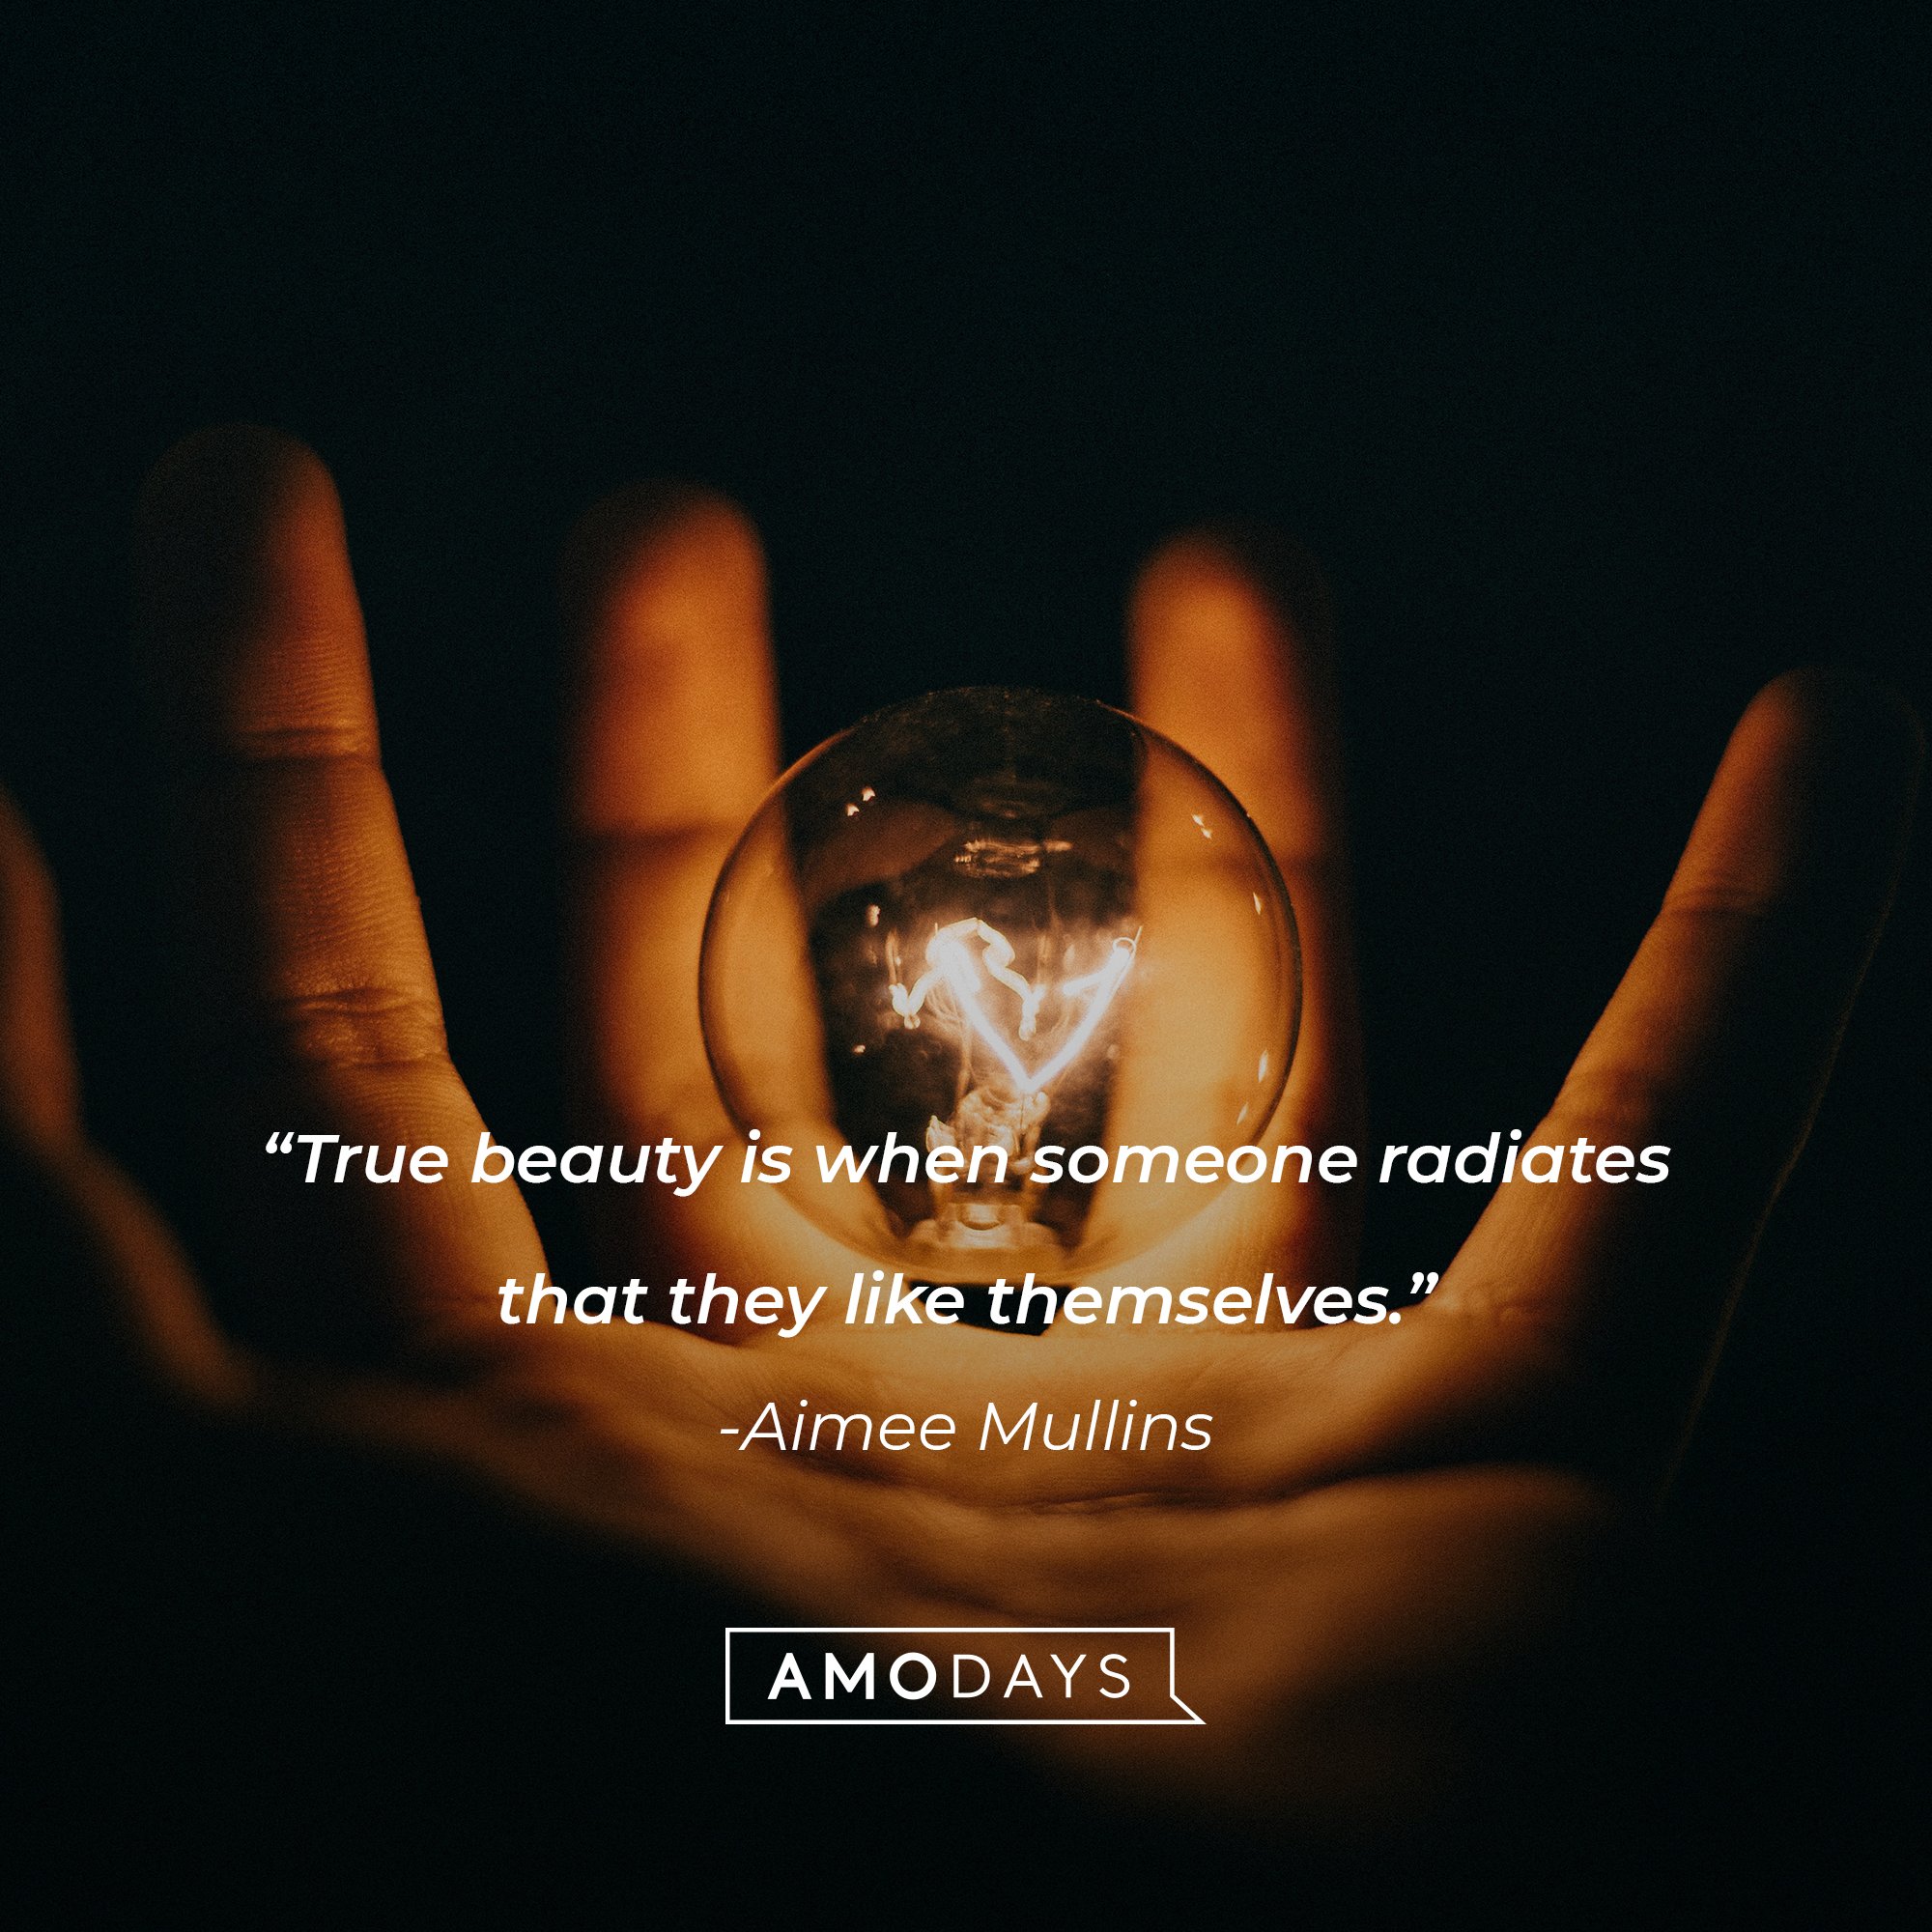 Aimee Mullins's quote:"True beauty is when someone radiates that they like themselves." | Image: AmoDays